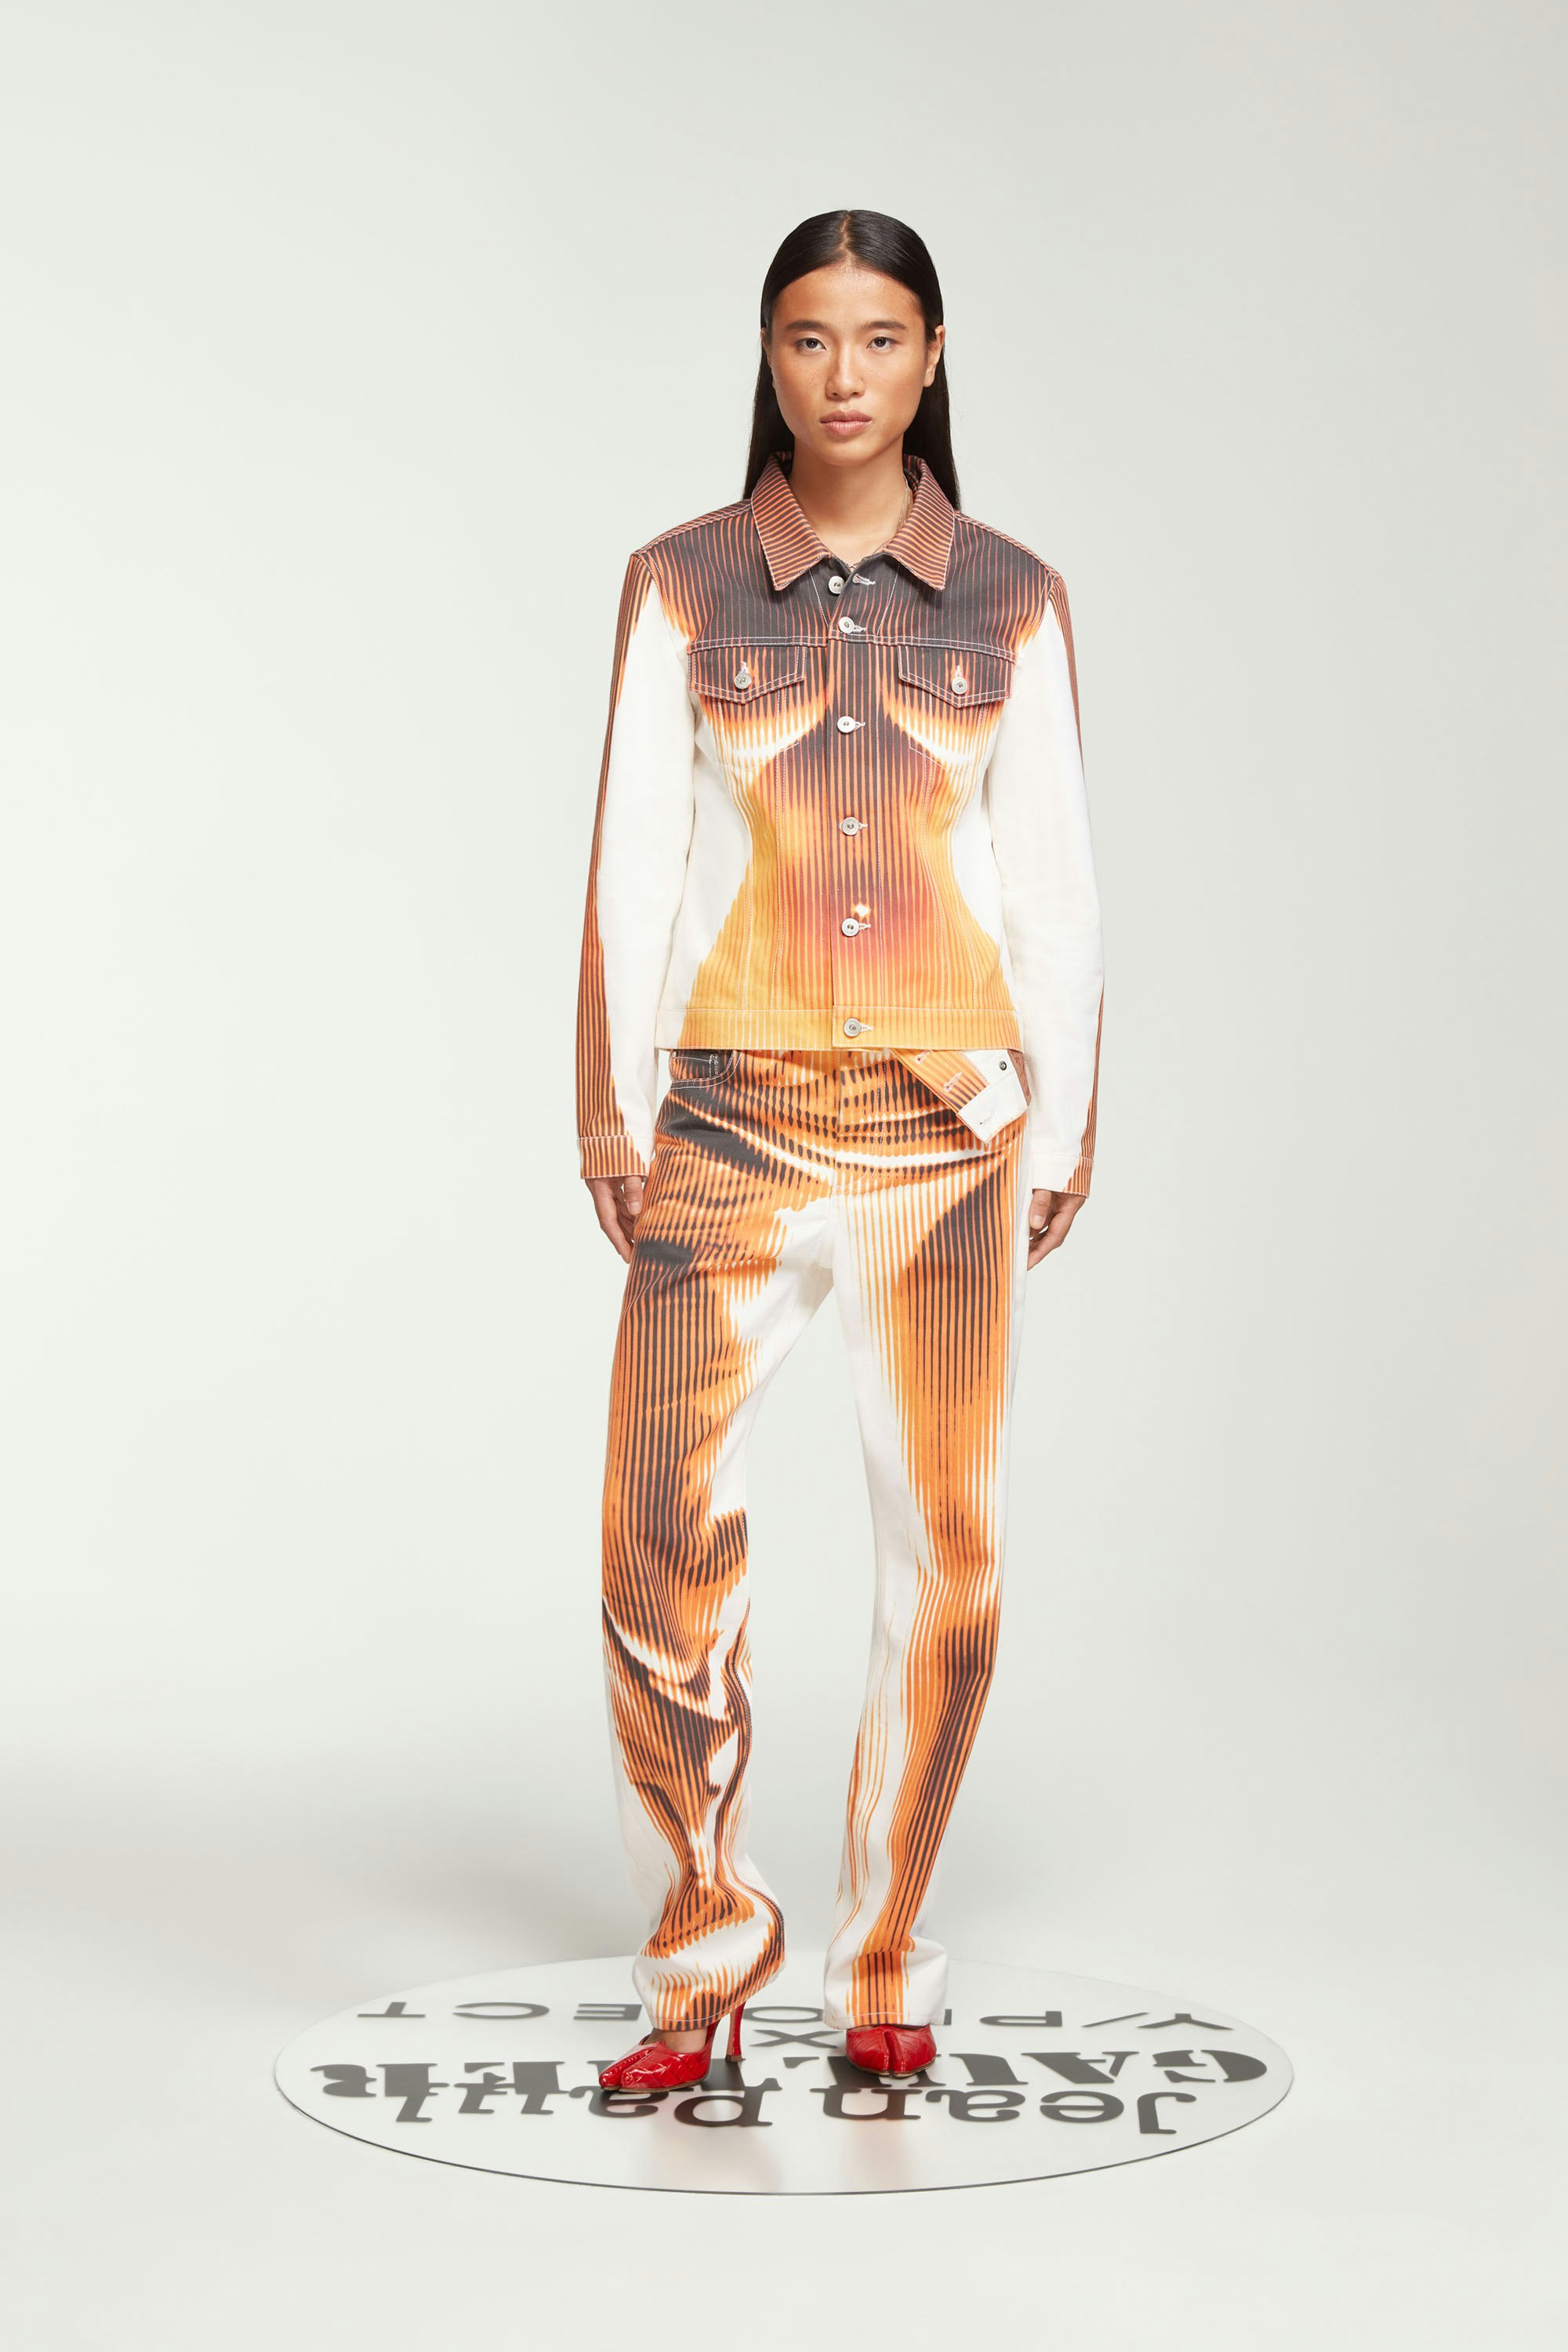 The White & Orange Body Morph Fitted Denim Jacket by Jean Paul Gaultier x Y/Project